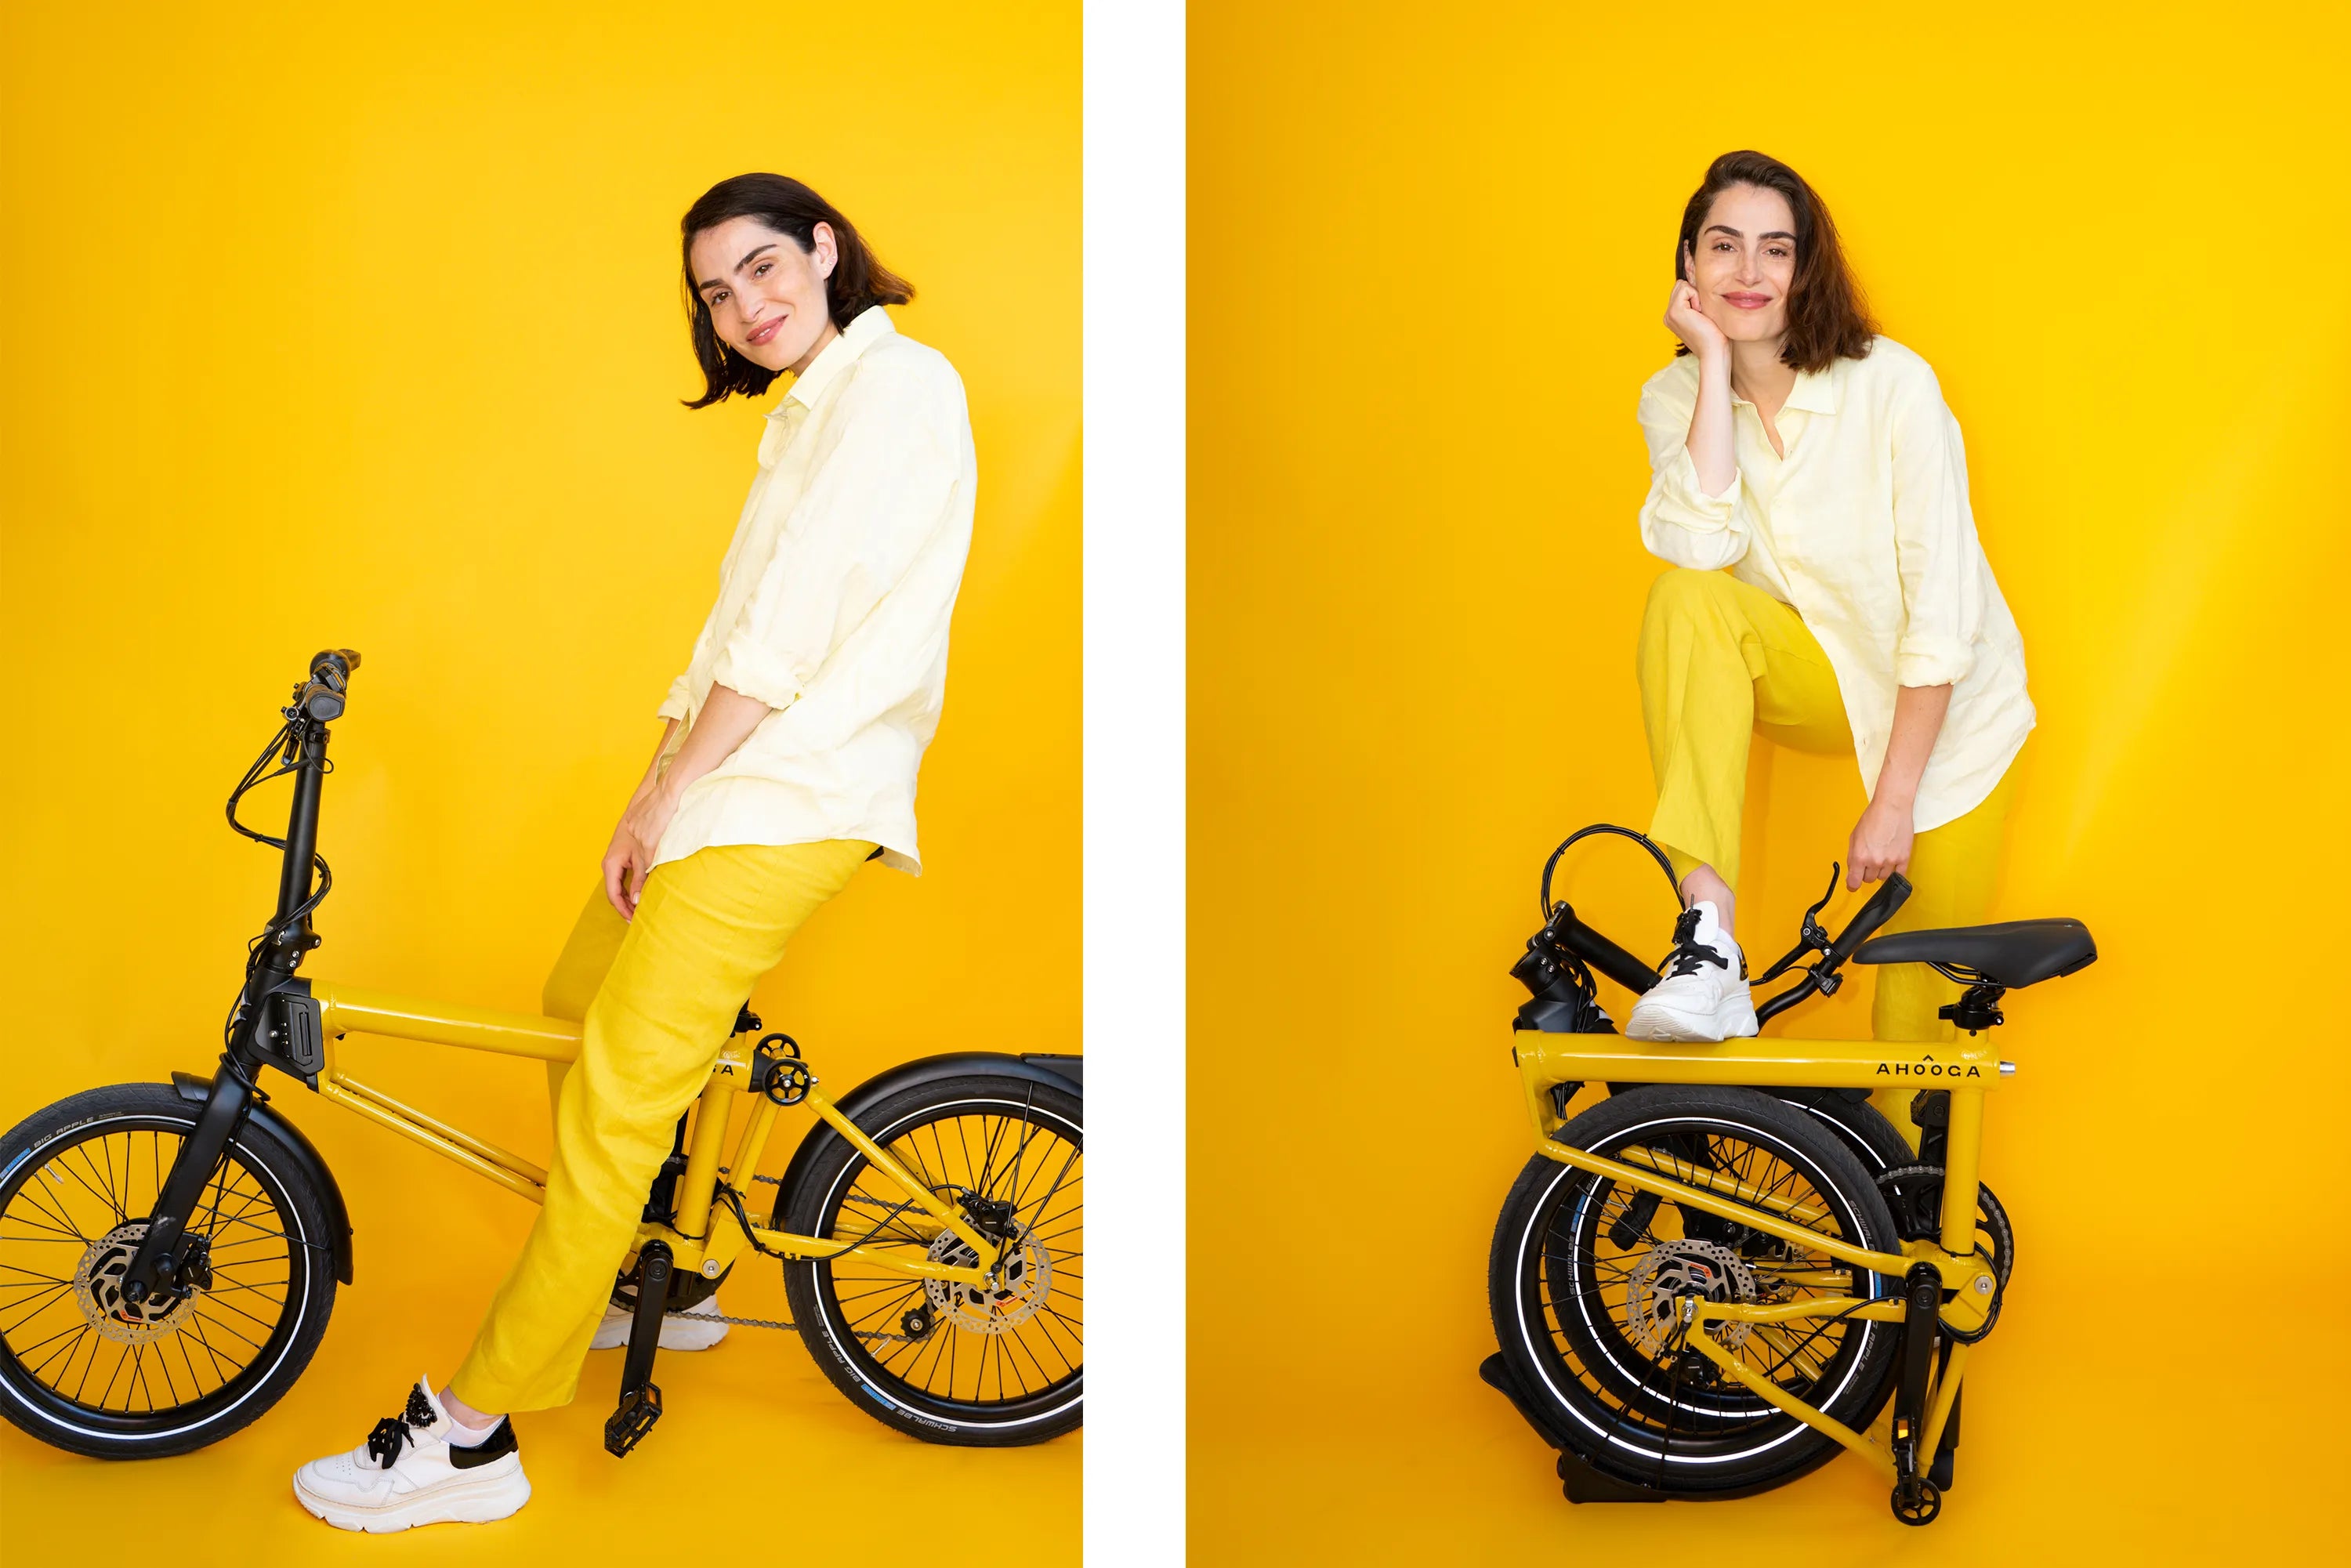 A product image of the Ahooga Max folding electric bike featuring a female model with the bike shown in both its fully open and fully folded configurations.. The bike frame is bumblebee yellow with black accents. The Ahooga Max folding electric bike is available to buy from Bleeper.